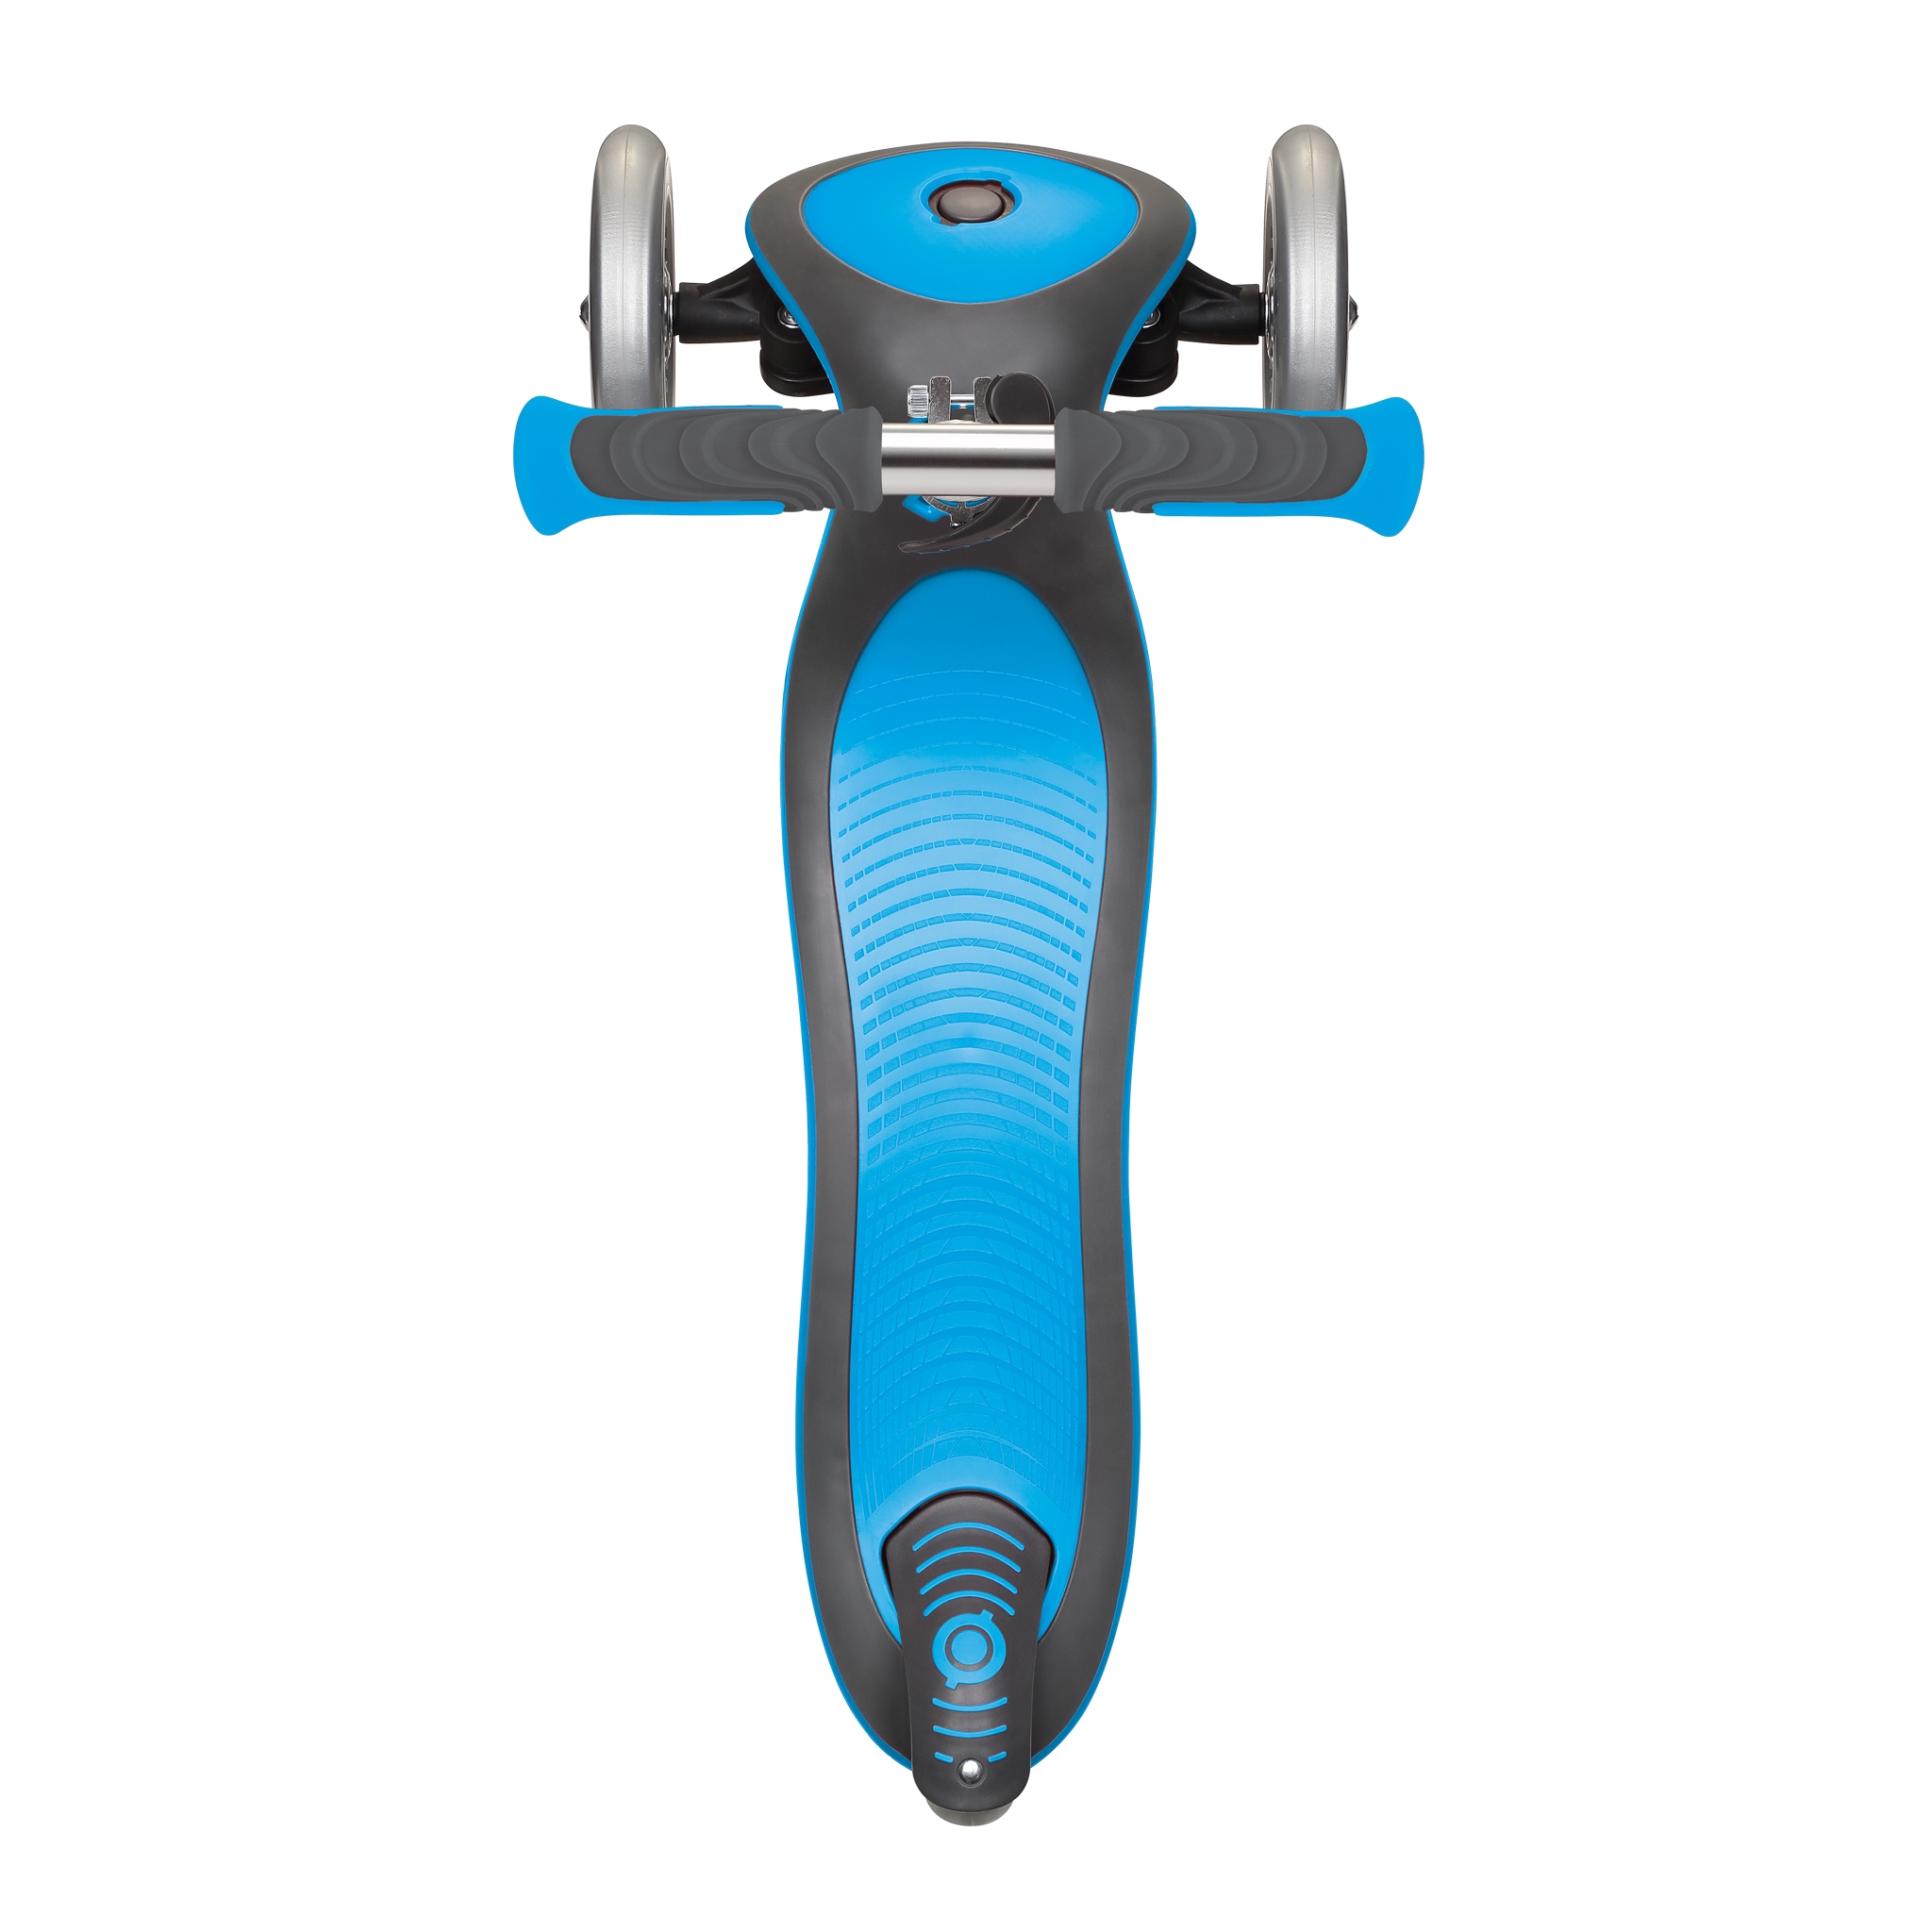 Globber-ELITE-DELUXE-3-wheel-foldable-scooter-for-kids-with-extra-wide-scooter-deck-sky-blue 4